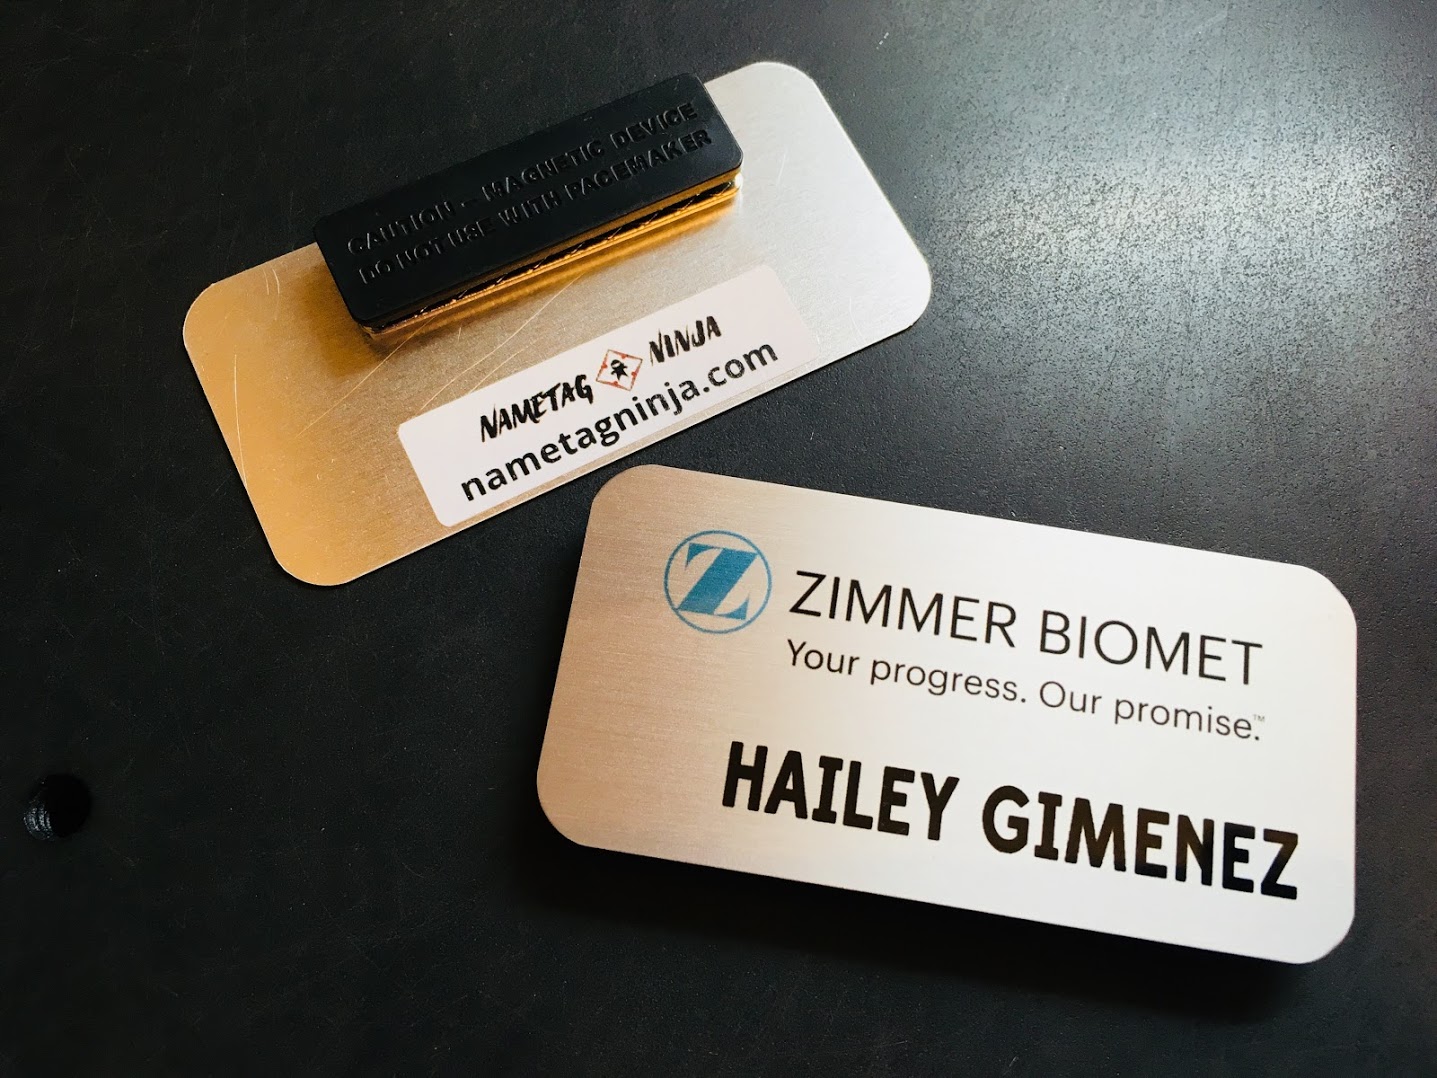 Brushed silver name badge. Photo shows front and back of the product. Design is for Zimmer Biomet.